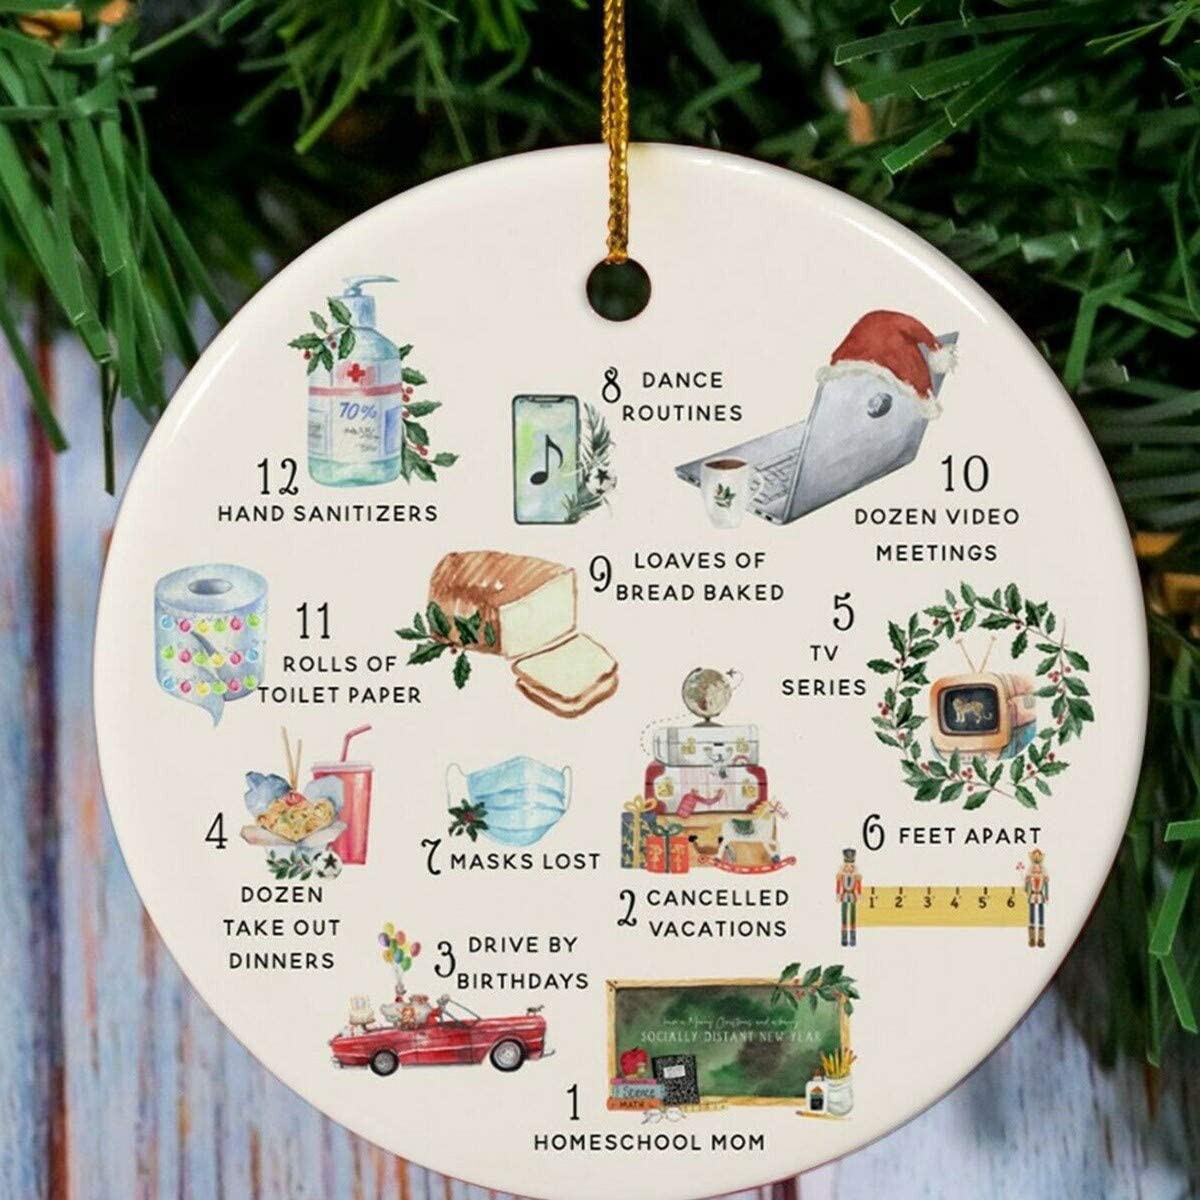 2020 Annual Events Ornament - The 12 Days Of Corona Ornament - Funny Idea 2020 The Year To Remember Forget